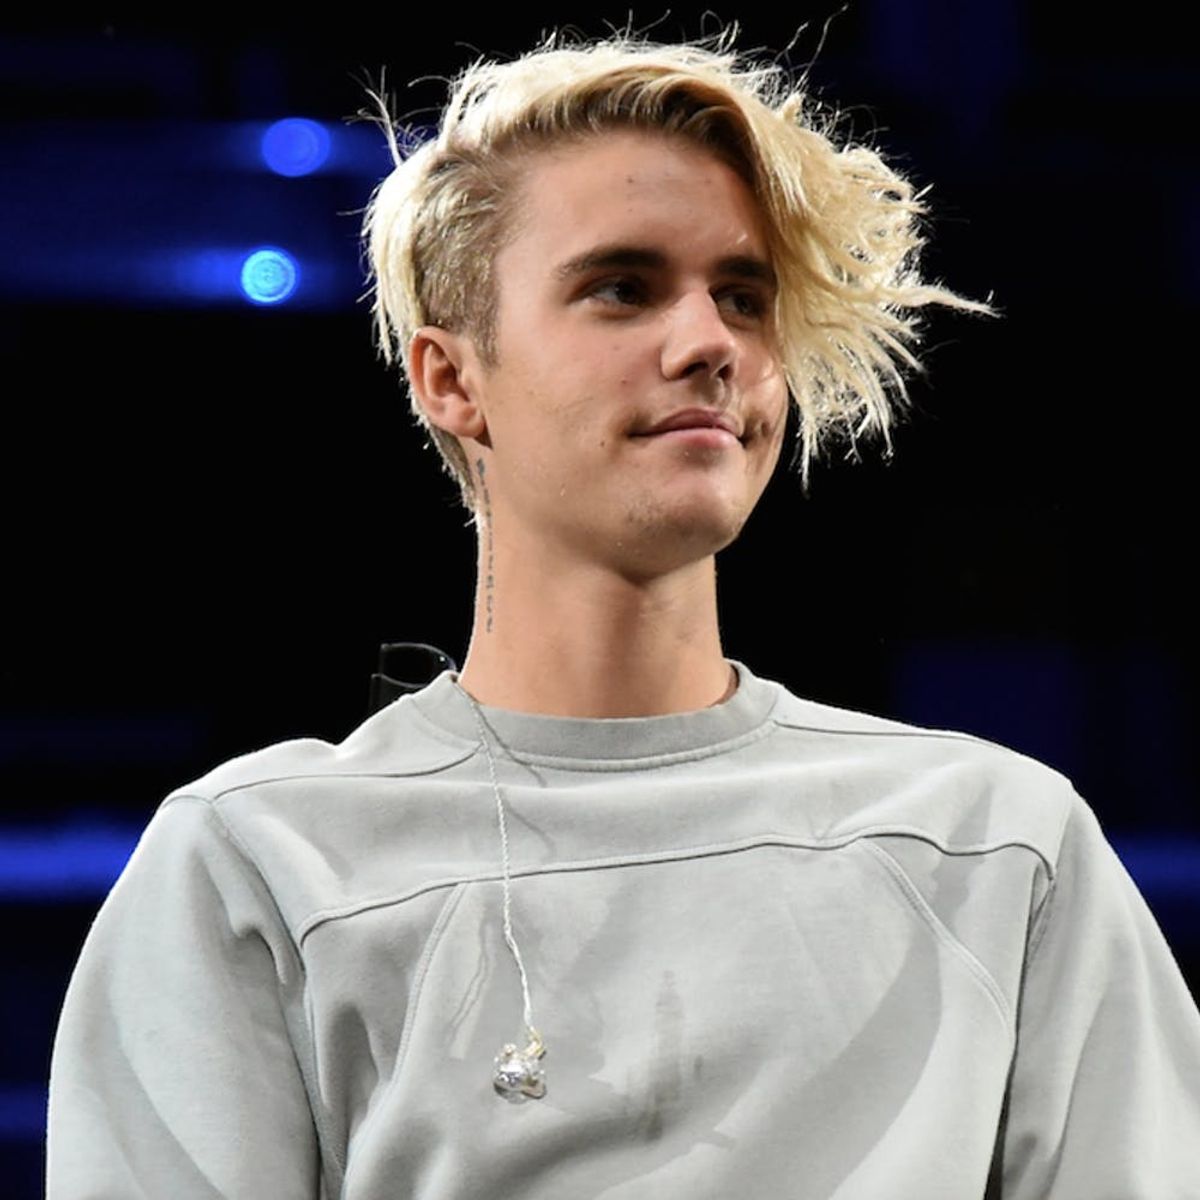 According to SCIENCE, Justin Bieber and Hailey Baldwin Might Be Destined for True Love